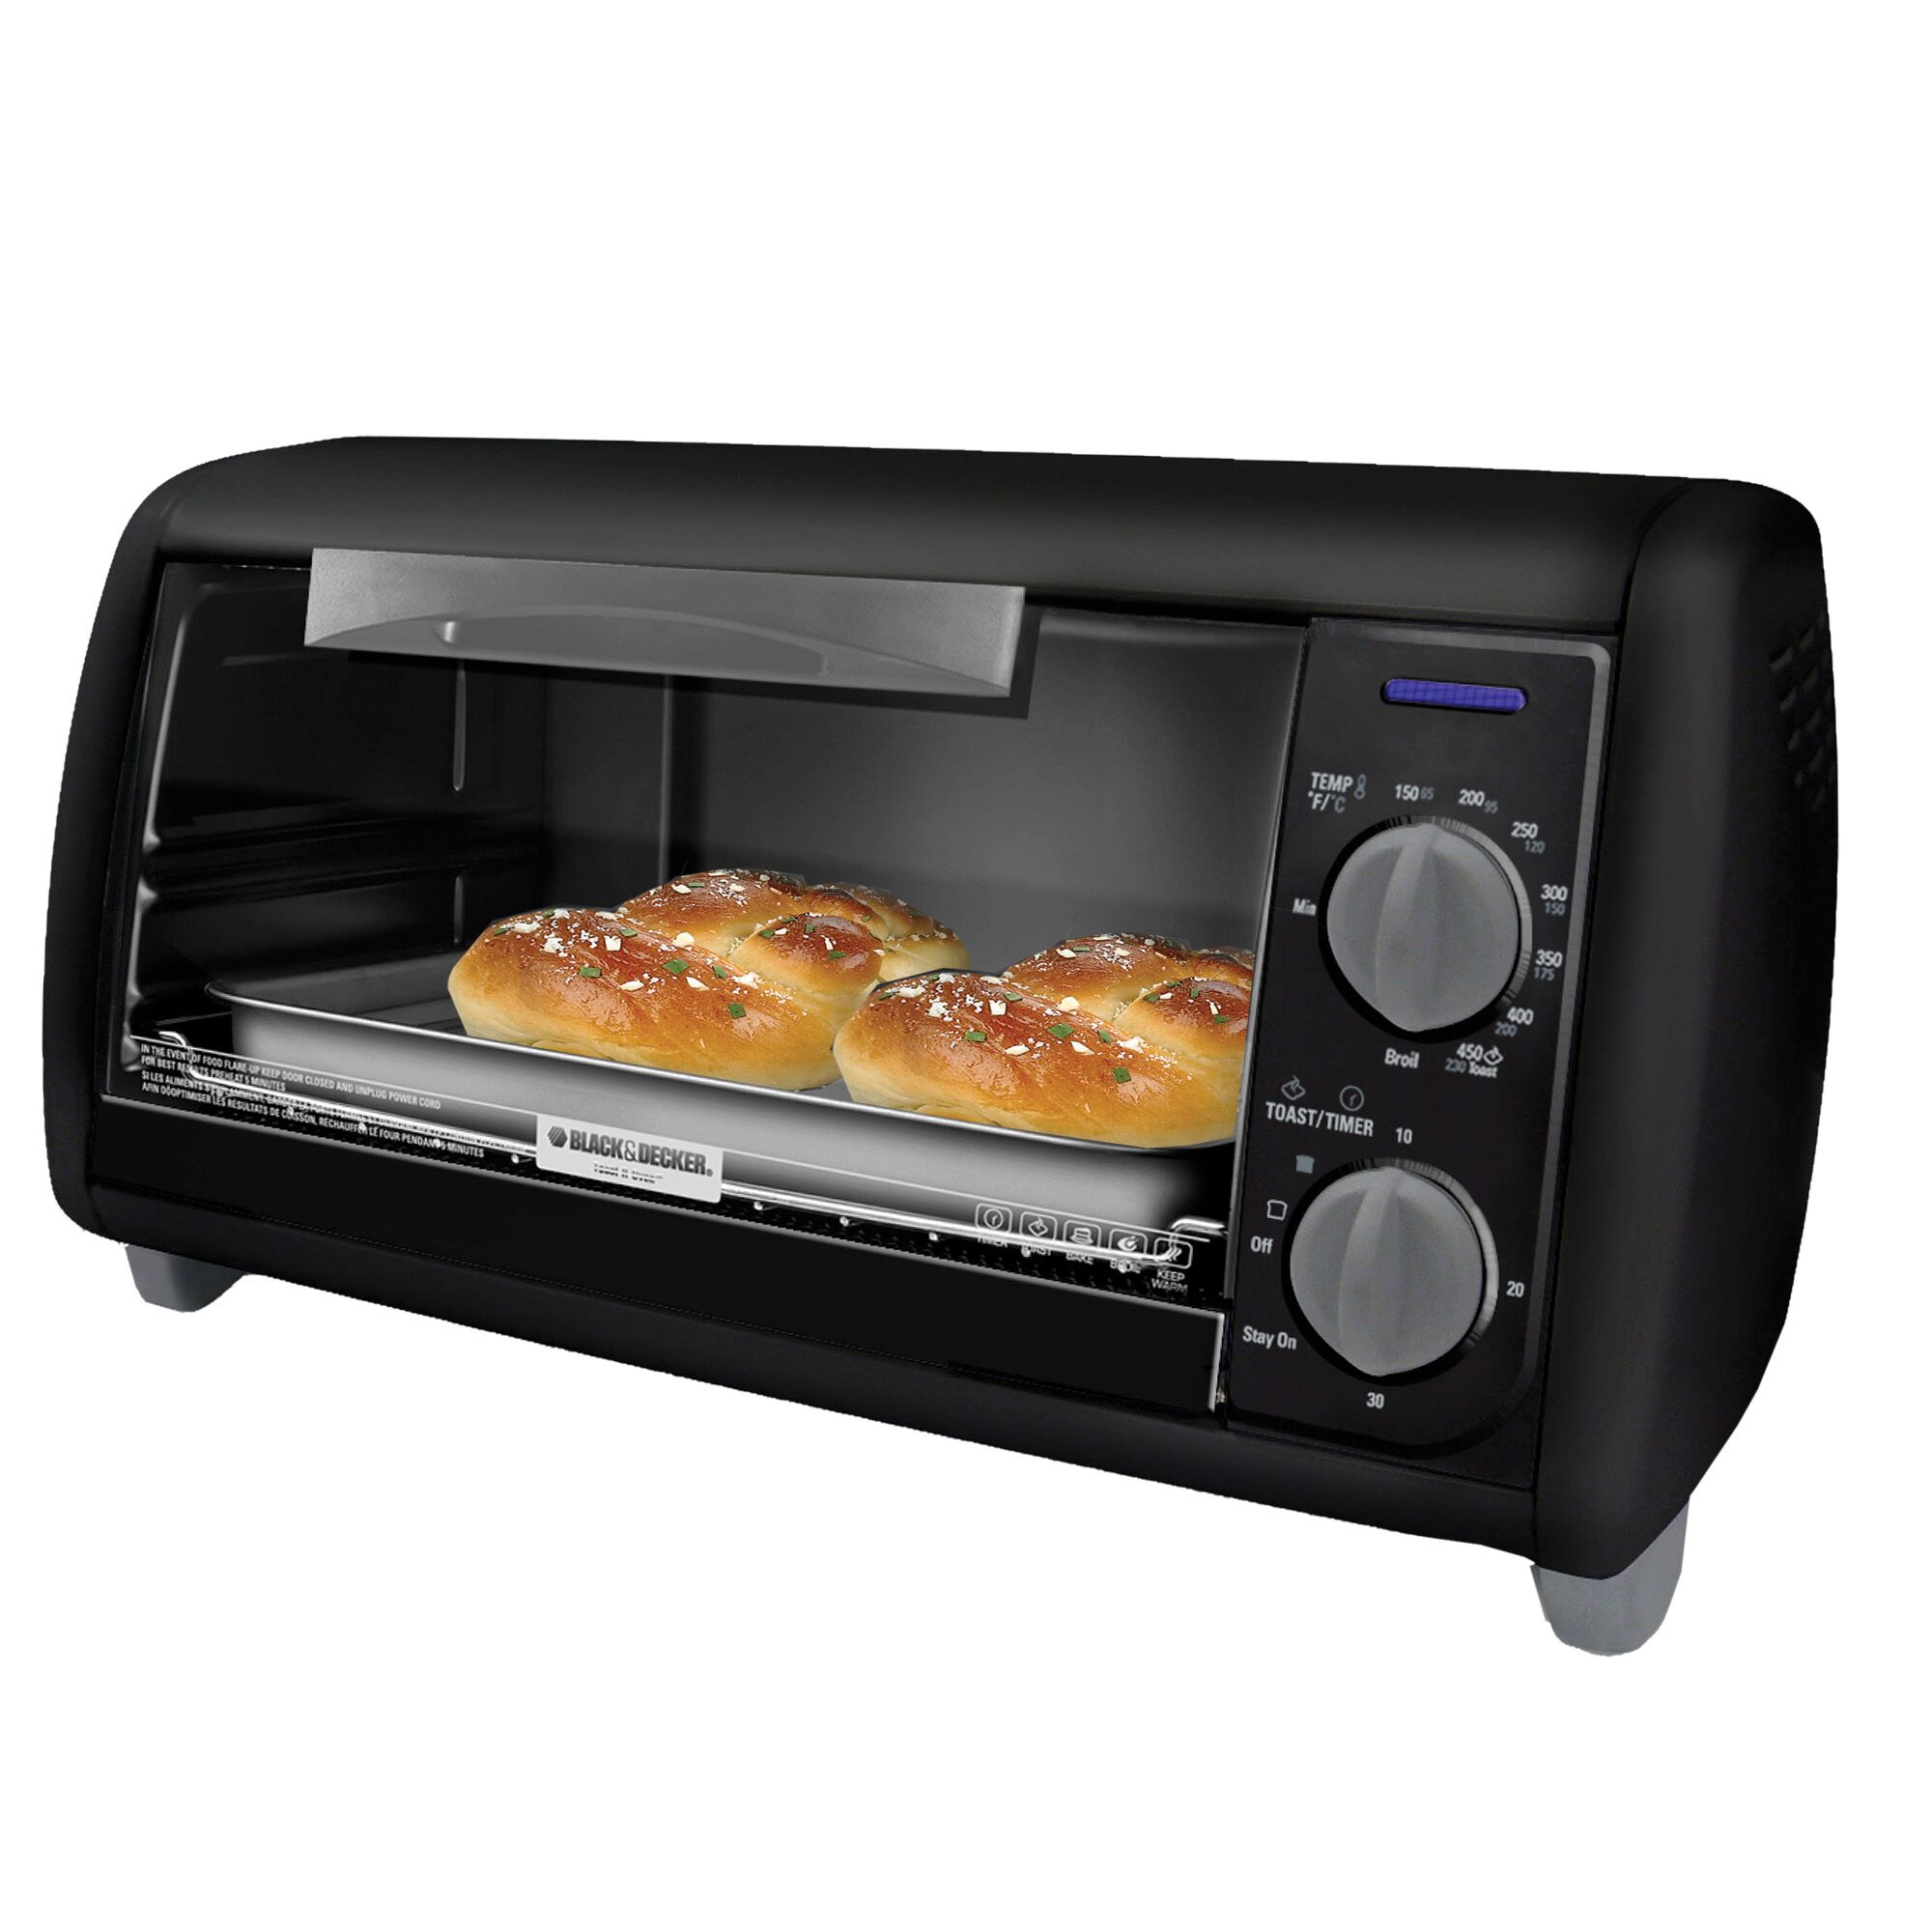 Profile of 4 slice toaster oven.